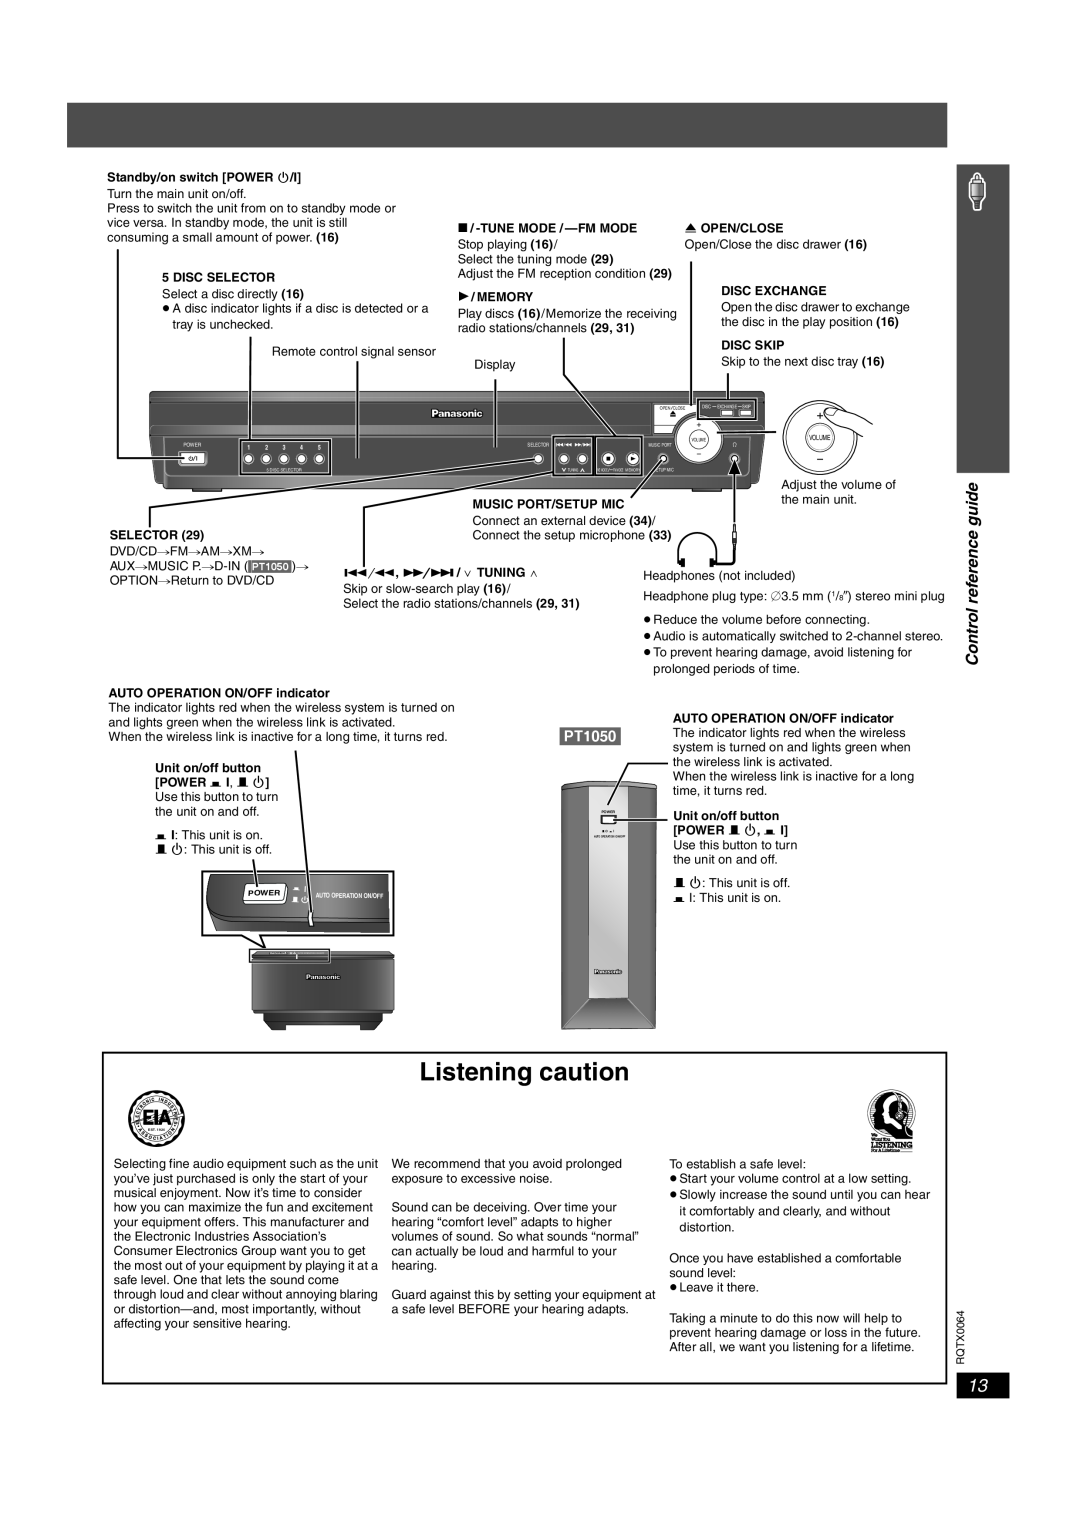 Panasonic SC-PT953, SCPT950, SCPT1050 operating instructions Listening caution, Control reference guide, Display 